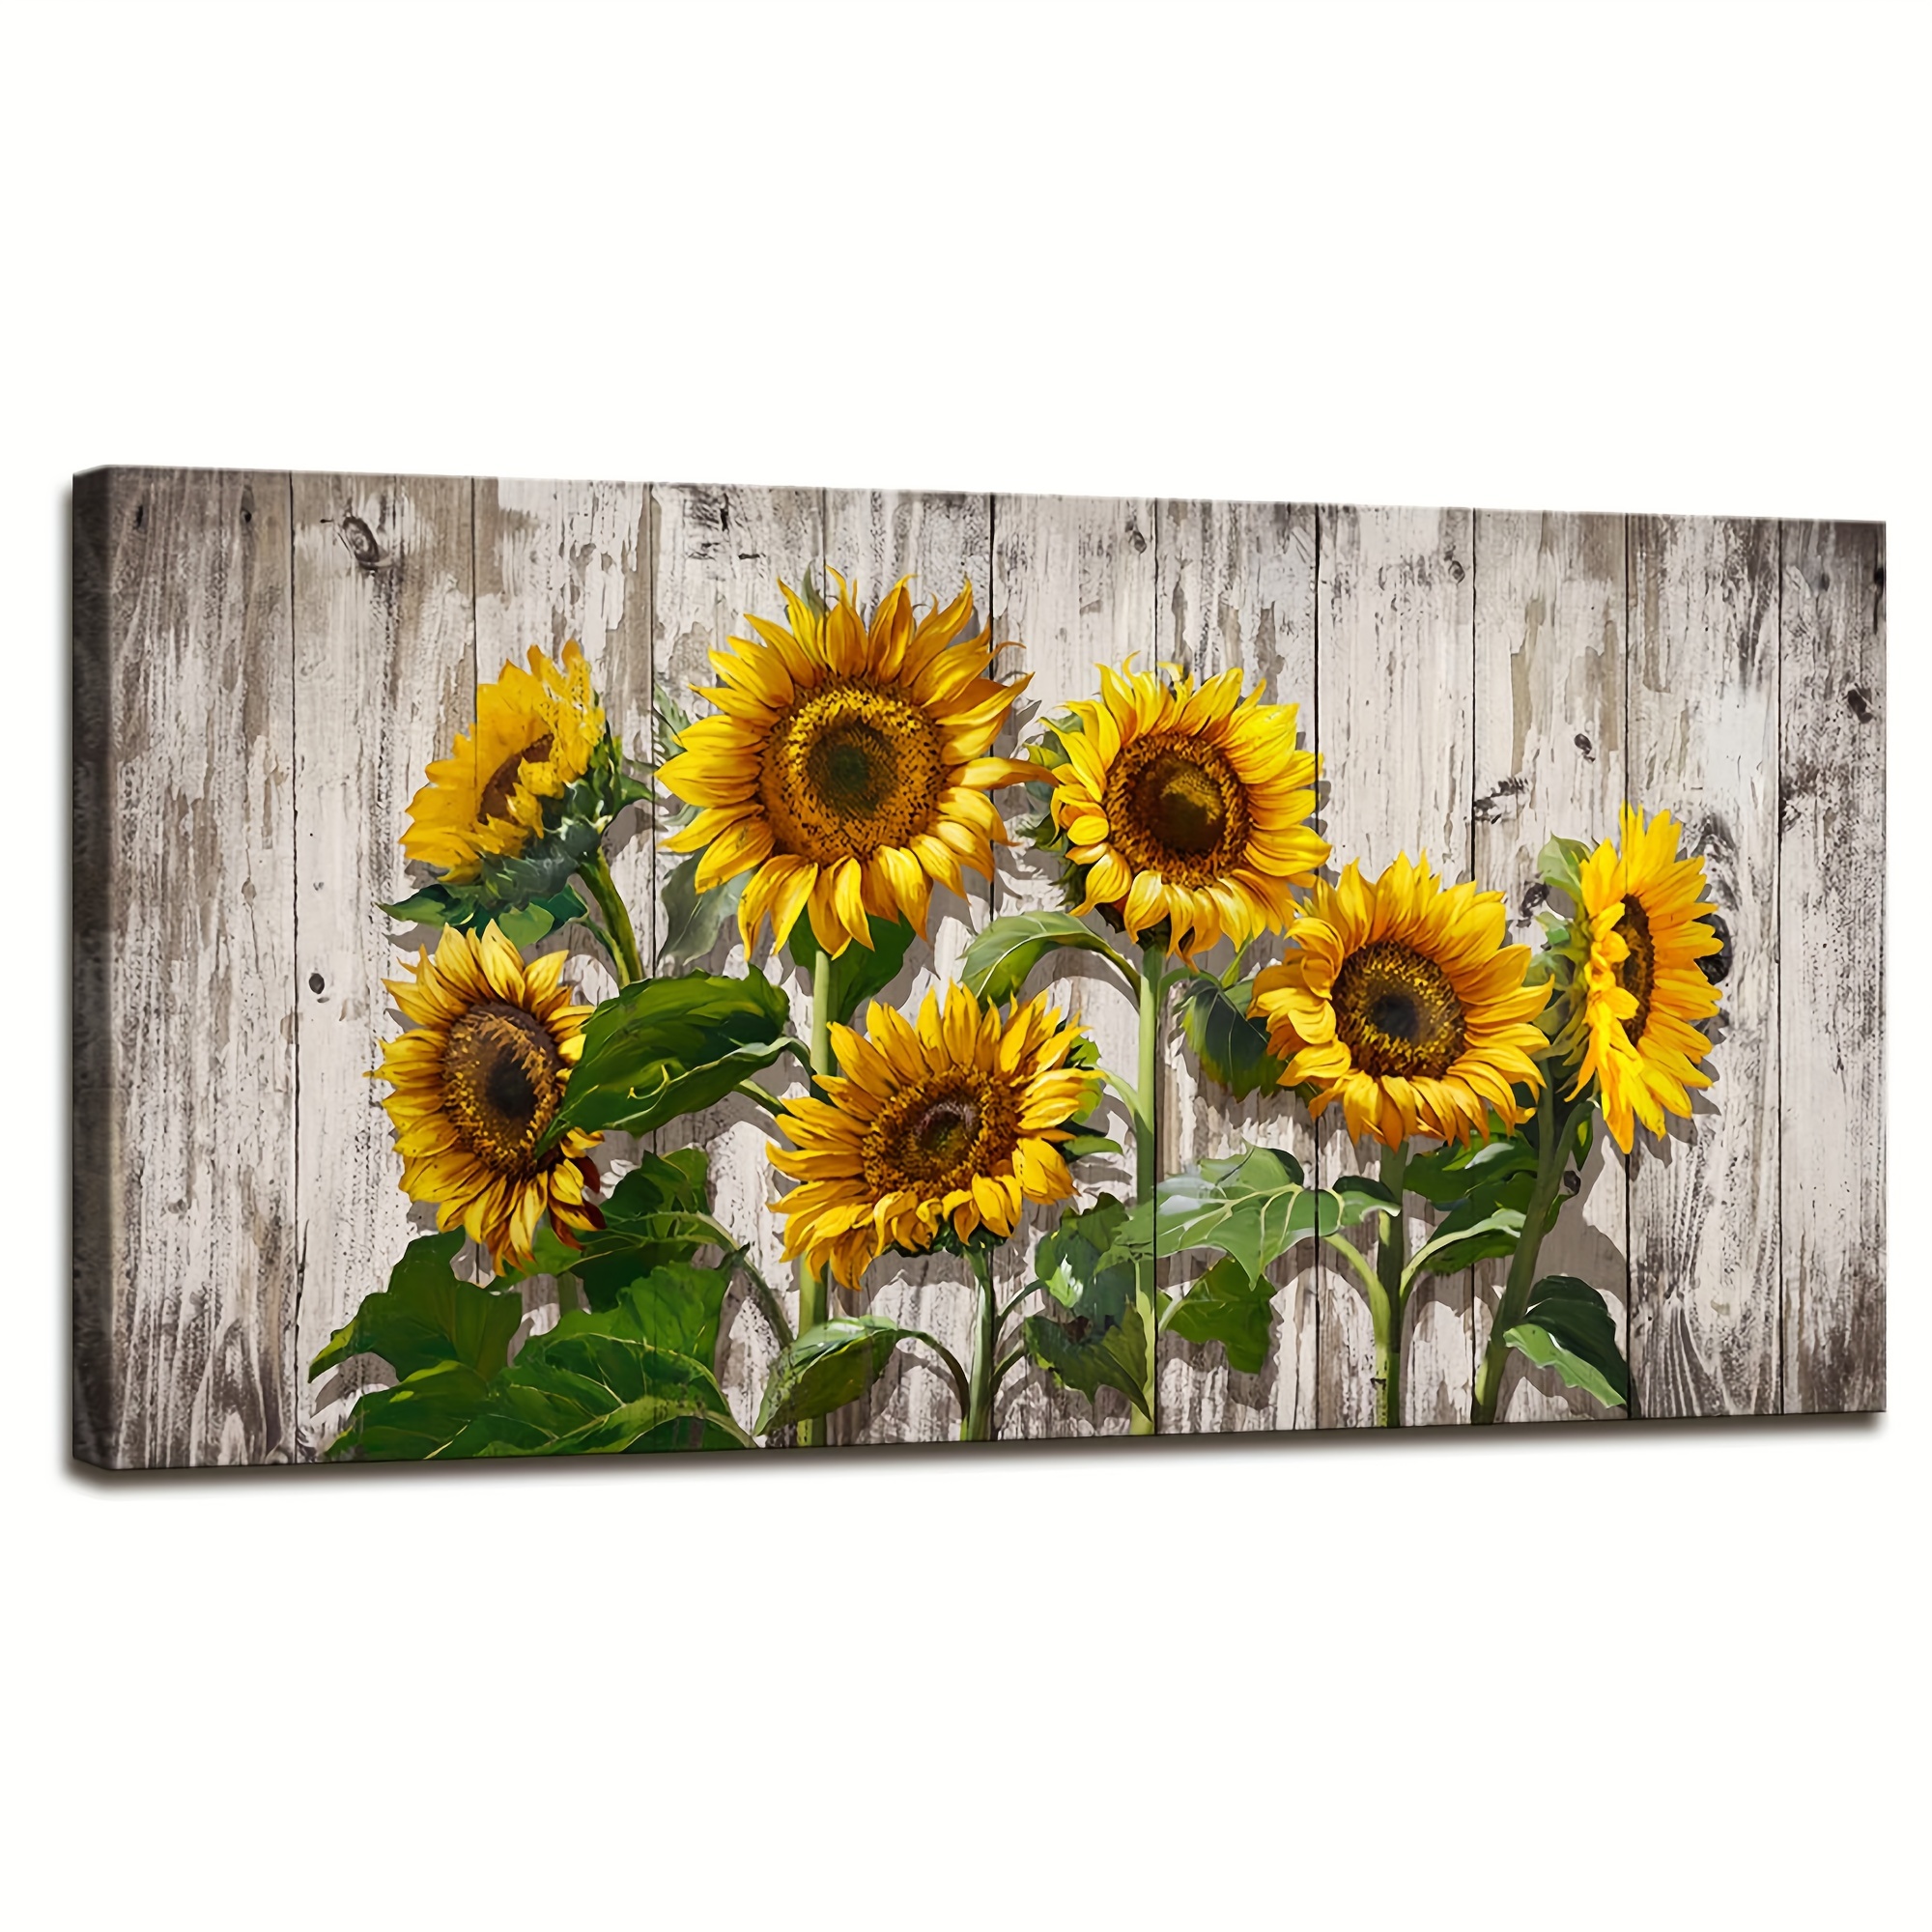 

1pc Canvas Prints Wall Art Abstract Board Paintings Wall Art For Bedroom Rustic Sunflower Kitchen Decor Yellow Vintage Wall Decor Sunflowers Living Room Bedroom Office 20x40inch - Unframed